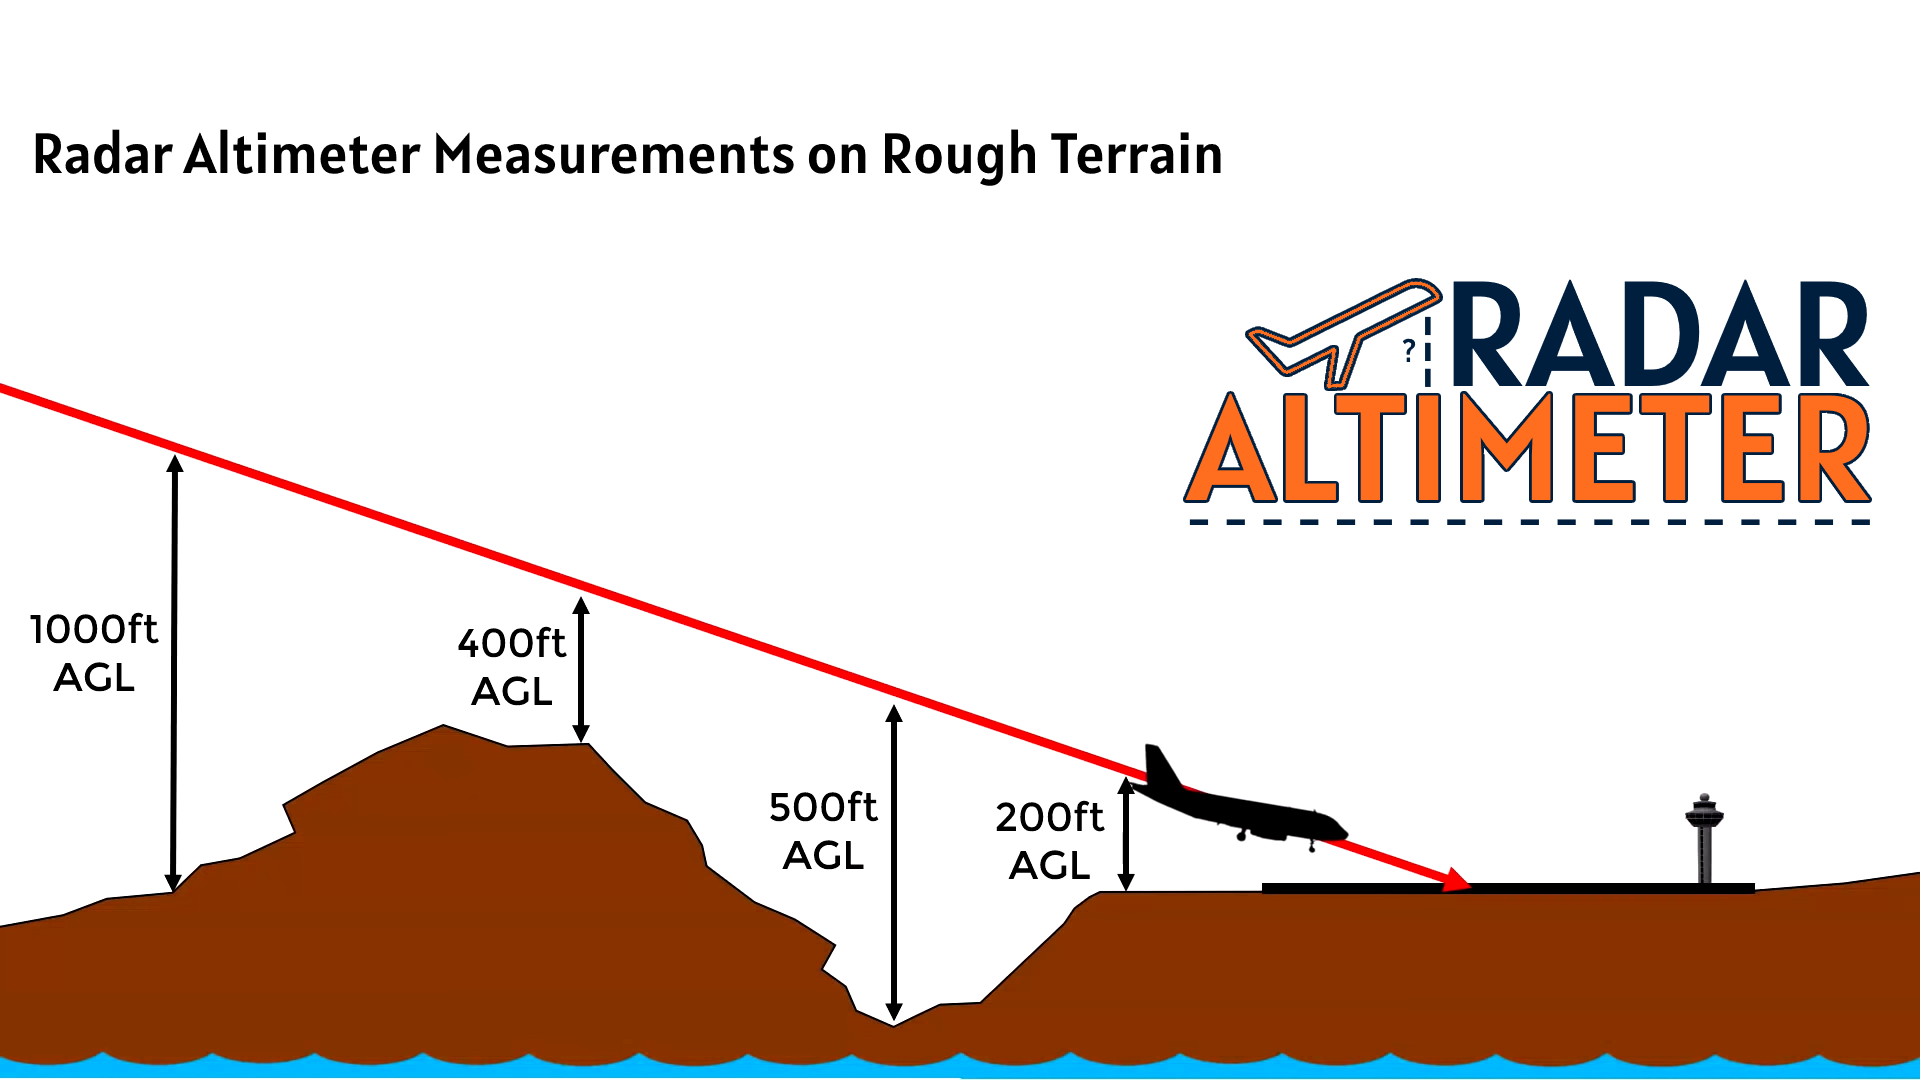 When using Radar Altimeter for measurements in sloped areas, certain situations may arise. This content can address these scenarios.